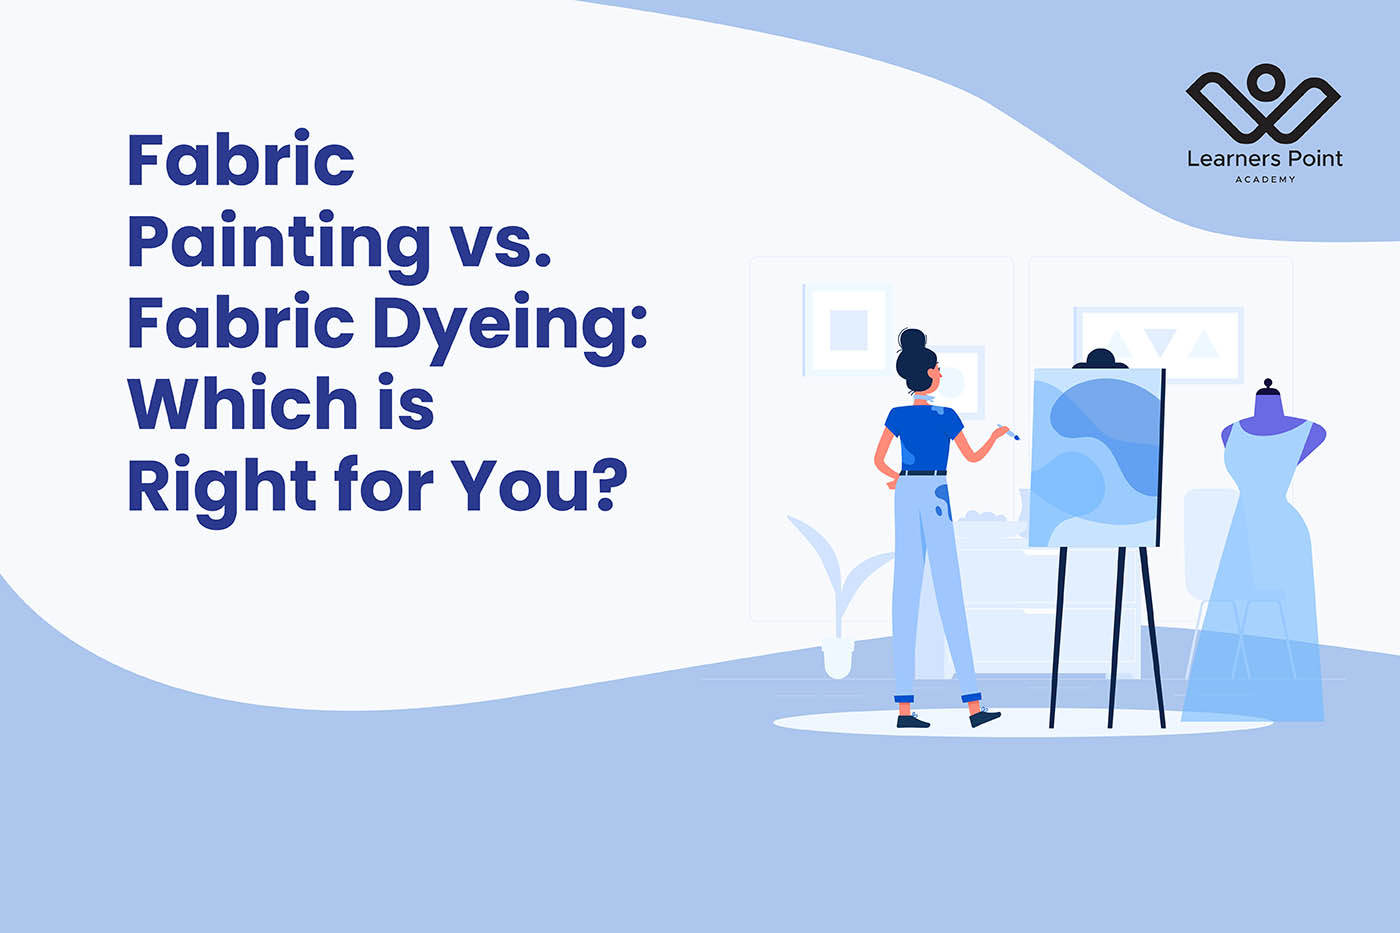 Fabric Painting vs. Fabric Dyeing: Which is Right for You?